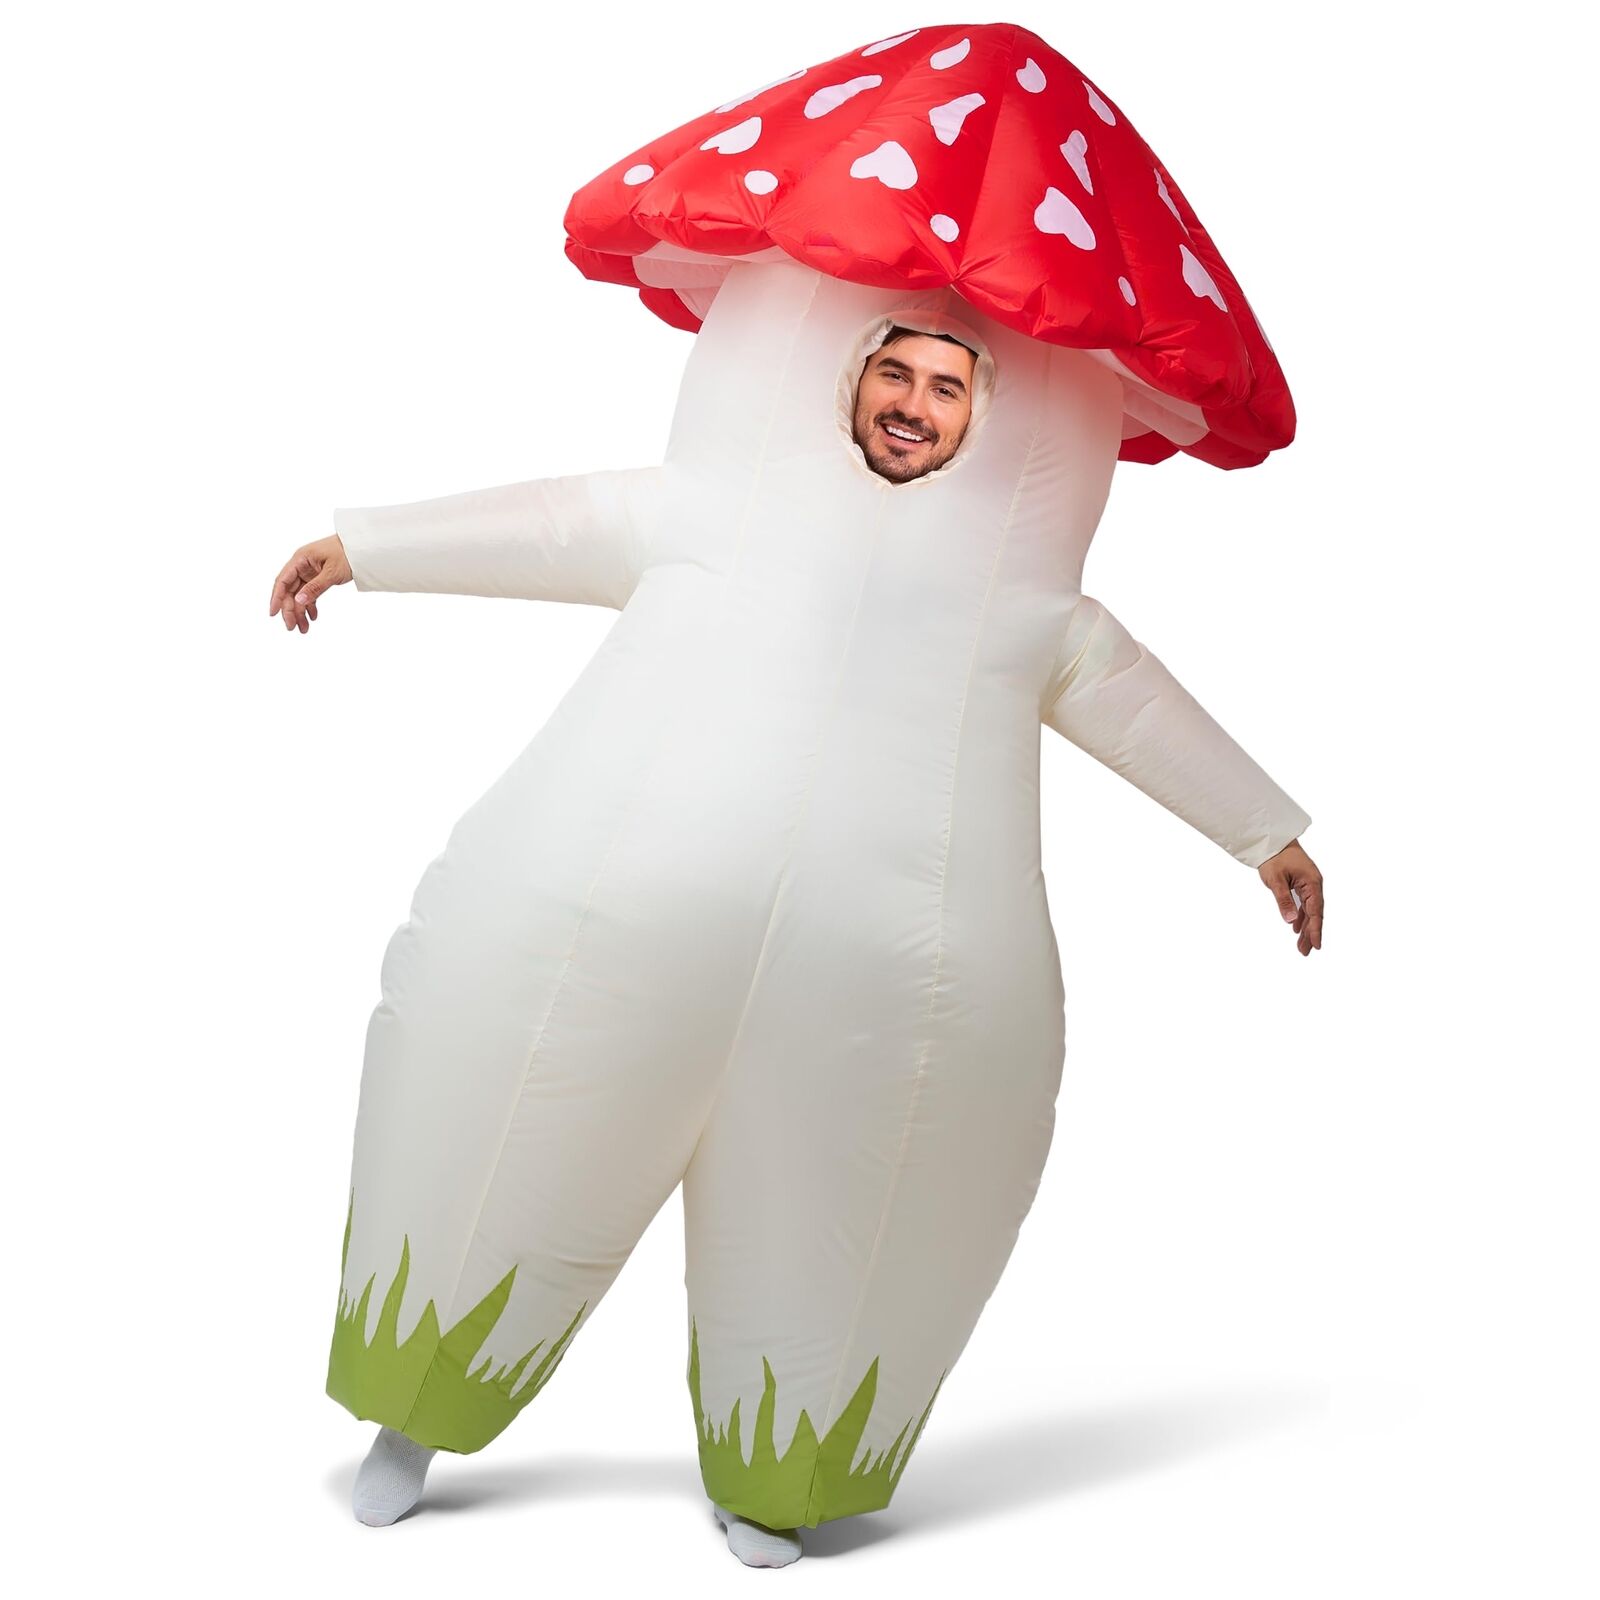 Spooktacular Creations Adult Inflatable Costume Full Body Mushroom Air Blow-up